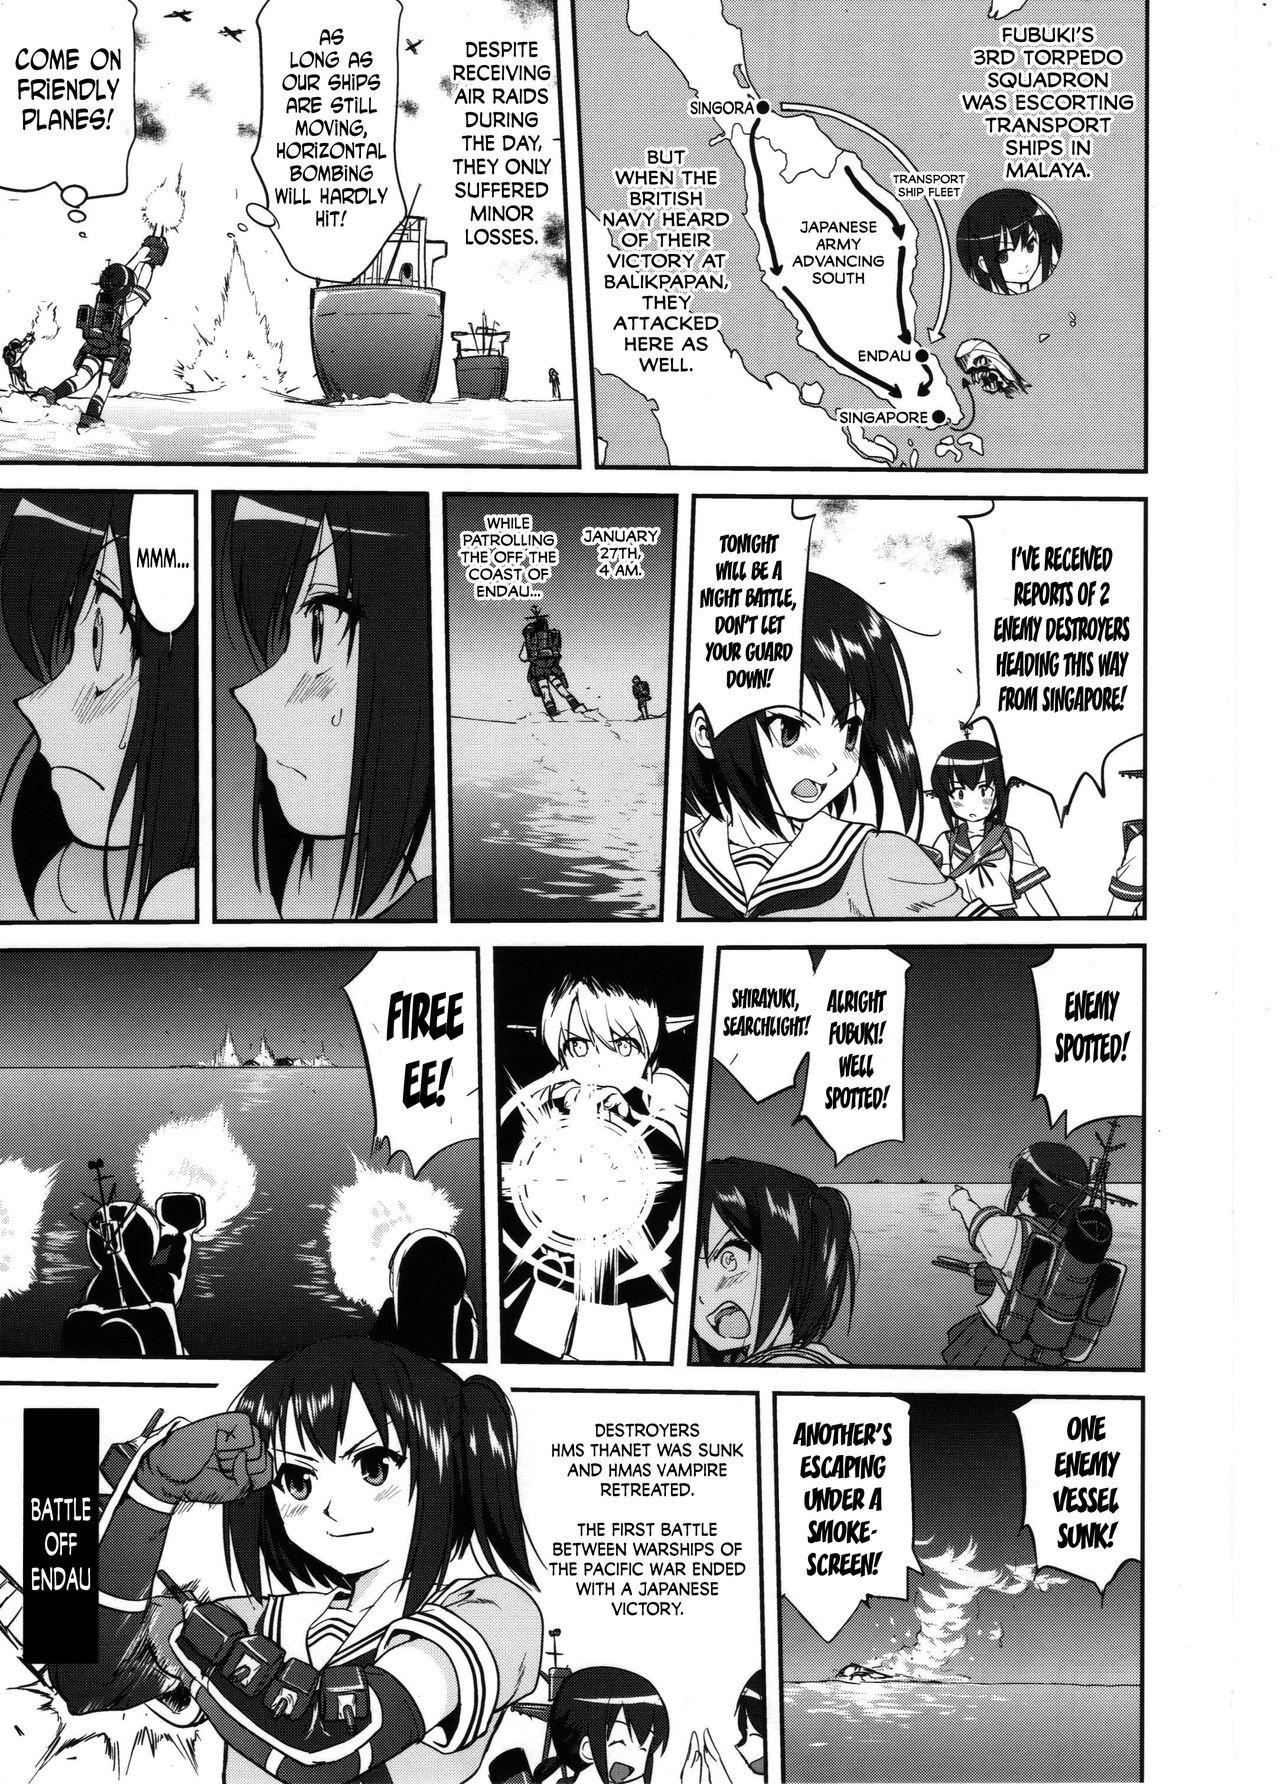 Hot Girls Getting Fucked Teitoku no Ketsudan MIDWAY | Admiral's Decision: MIDWAY - Kantai collection Pay - Page 14